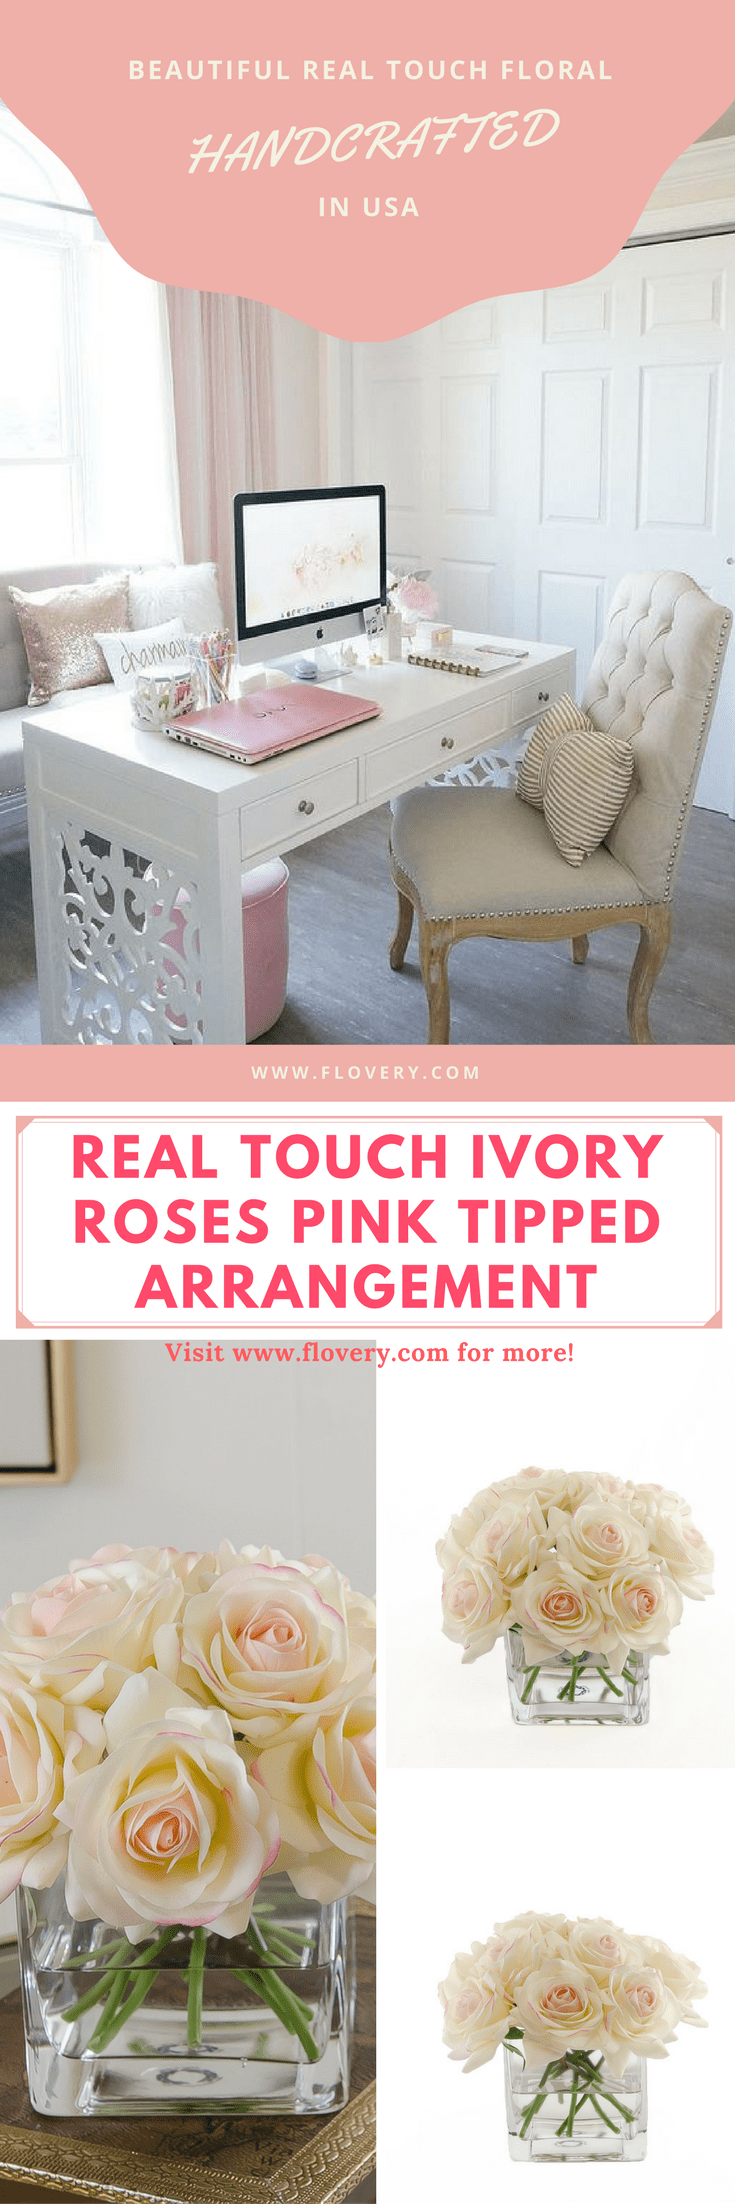 Real touch pink rose arrangement